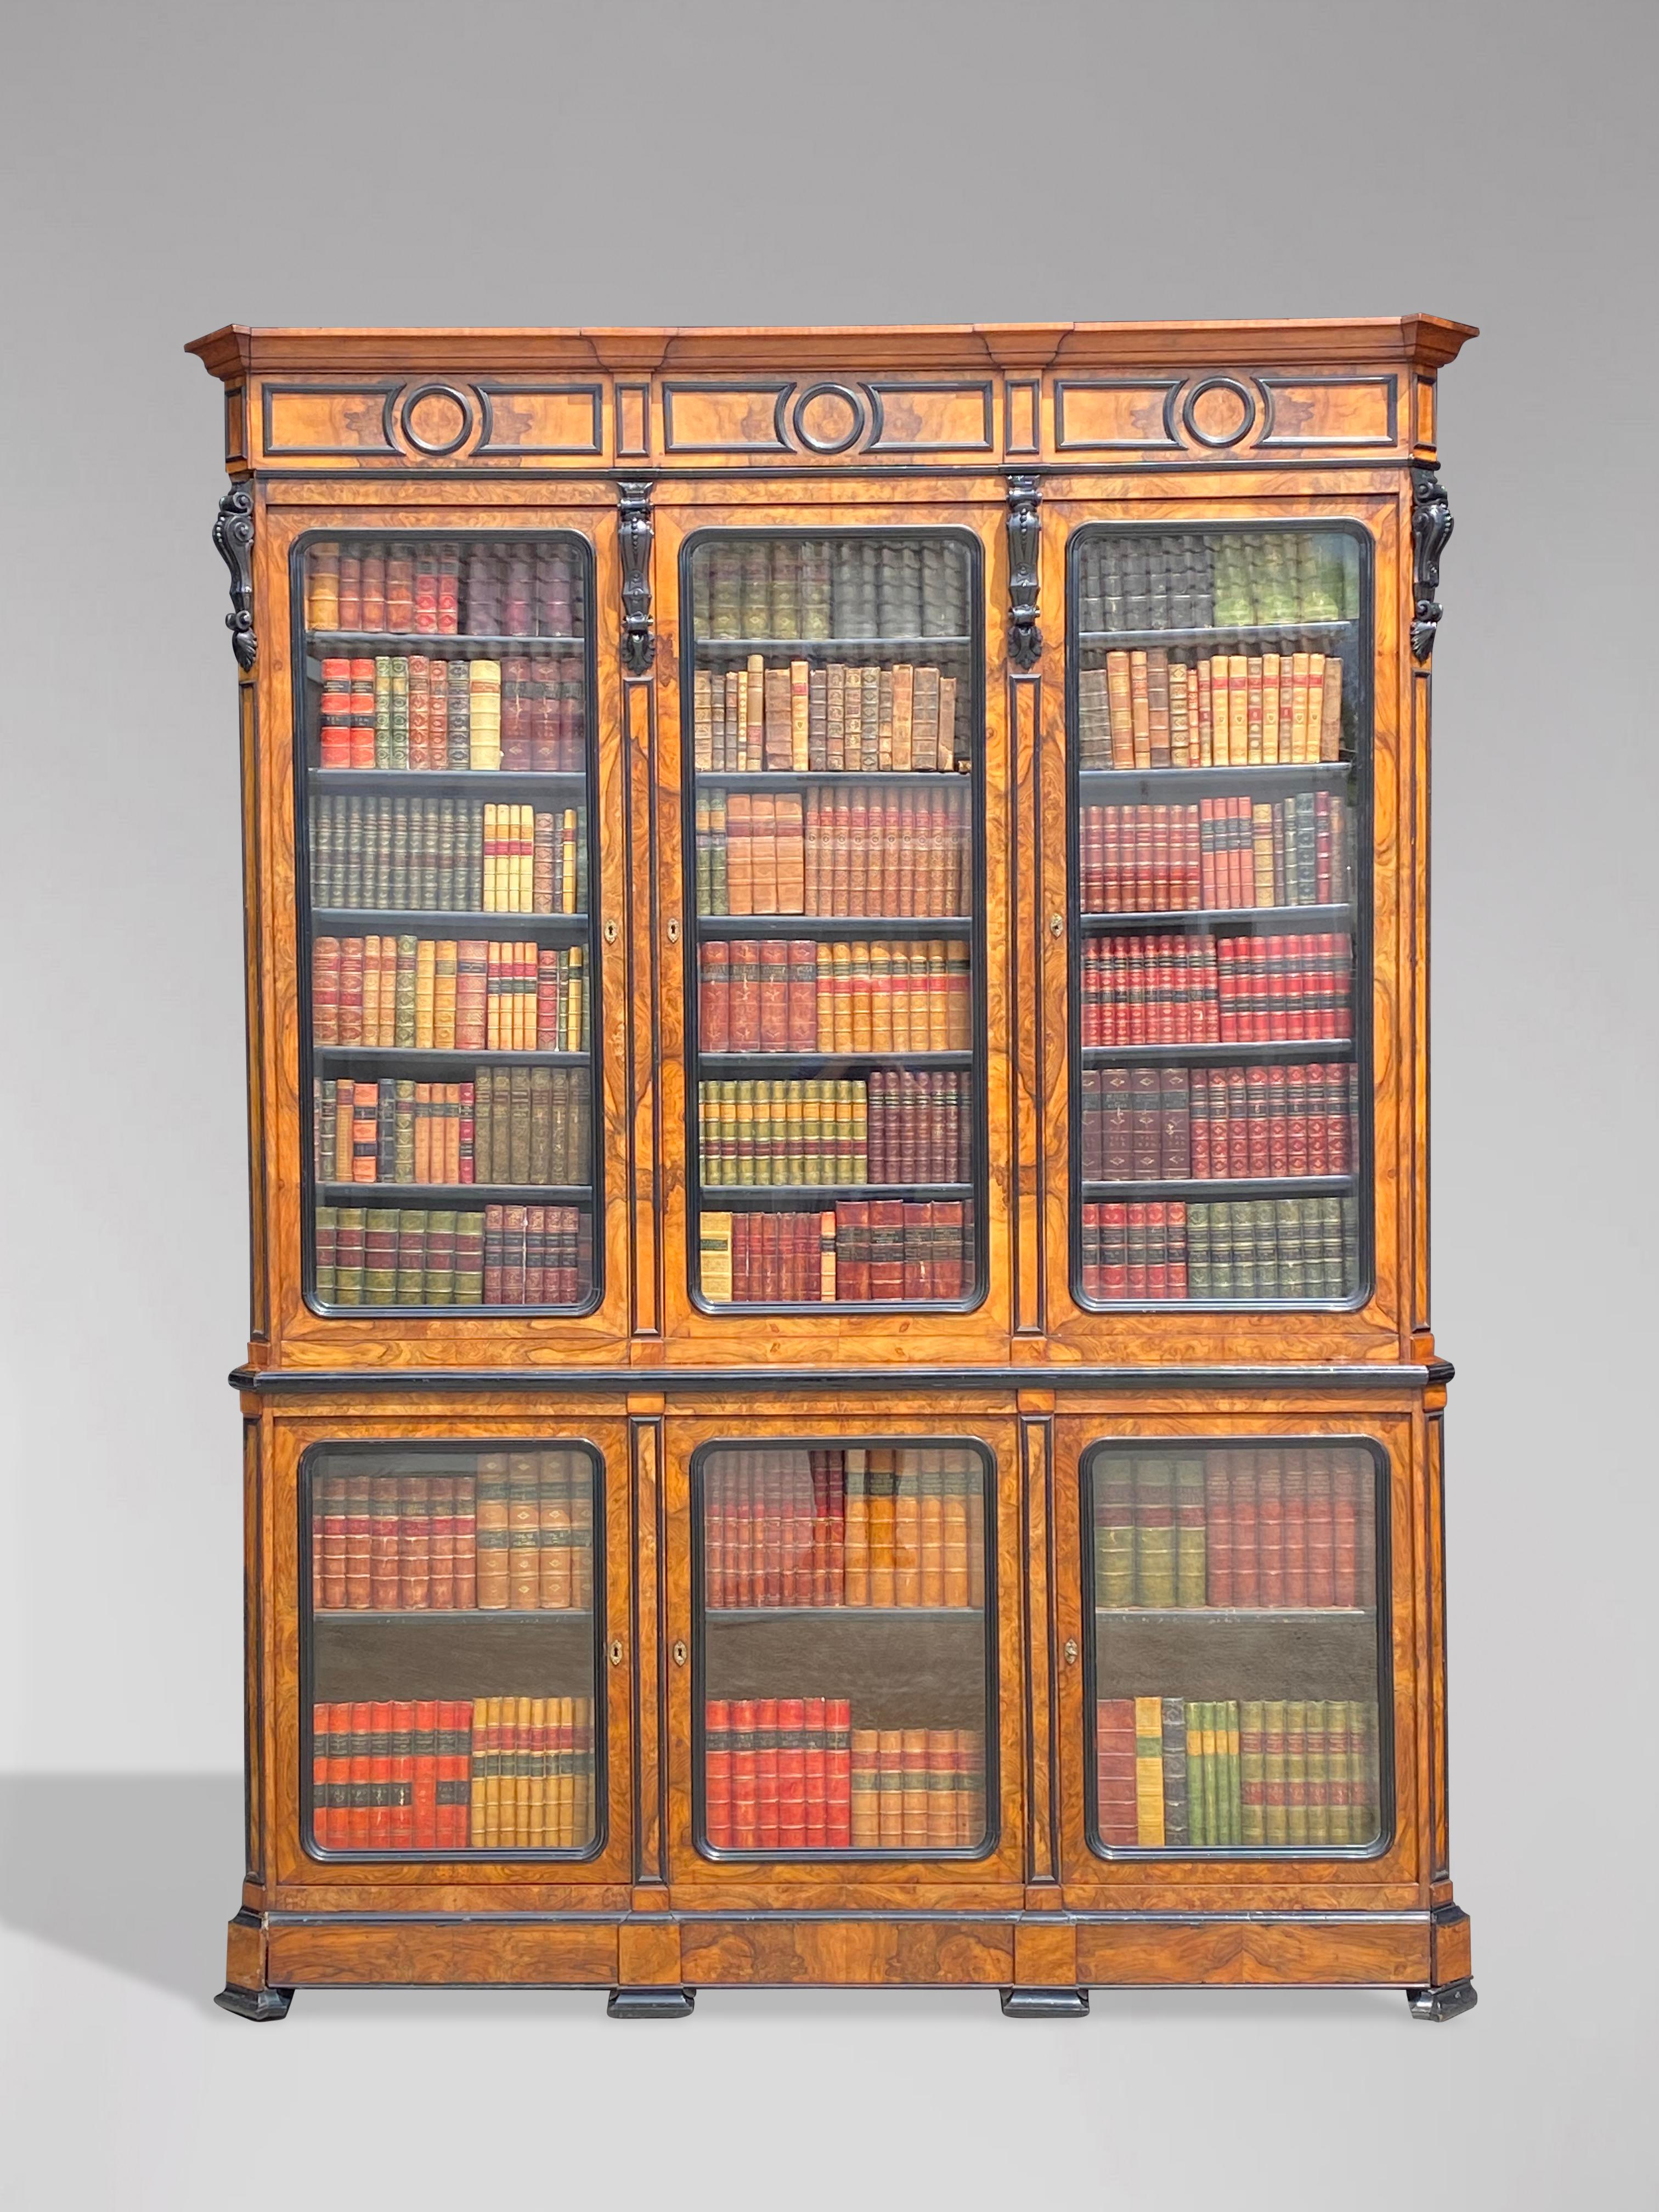 Stunning quality 19th Century French Walnut & Ebony Library Bookcase In Good Condition For Sale In Petworth,West Sussex, GB